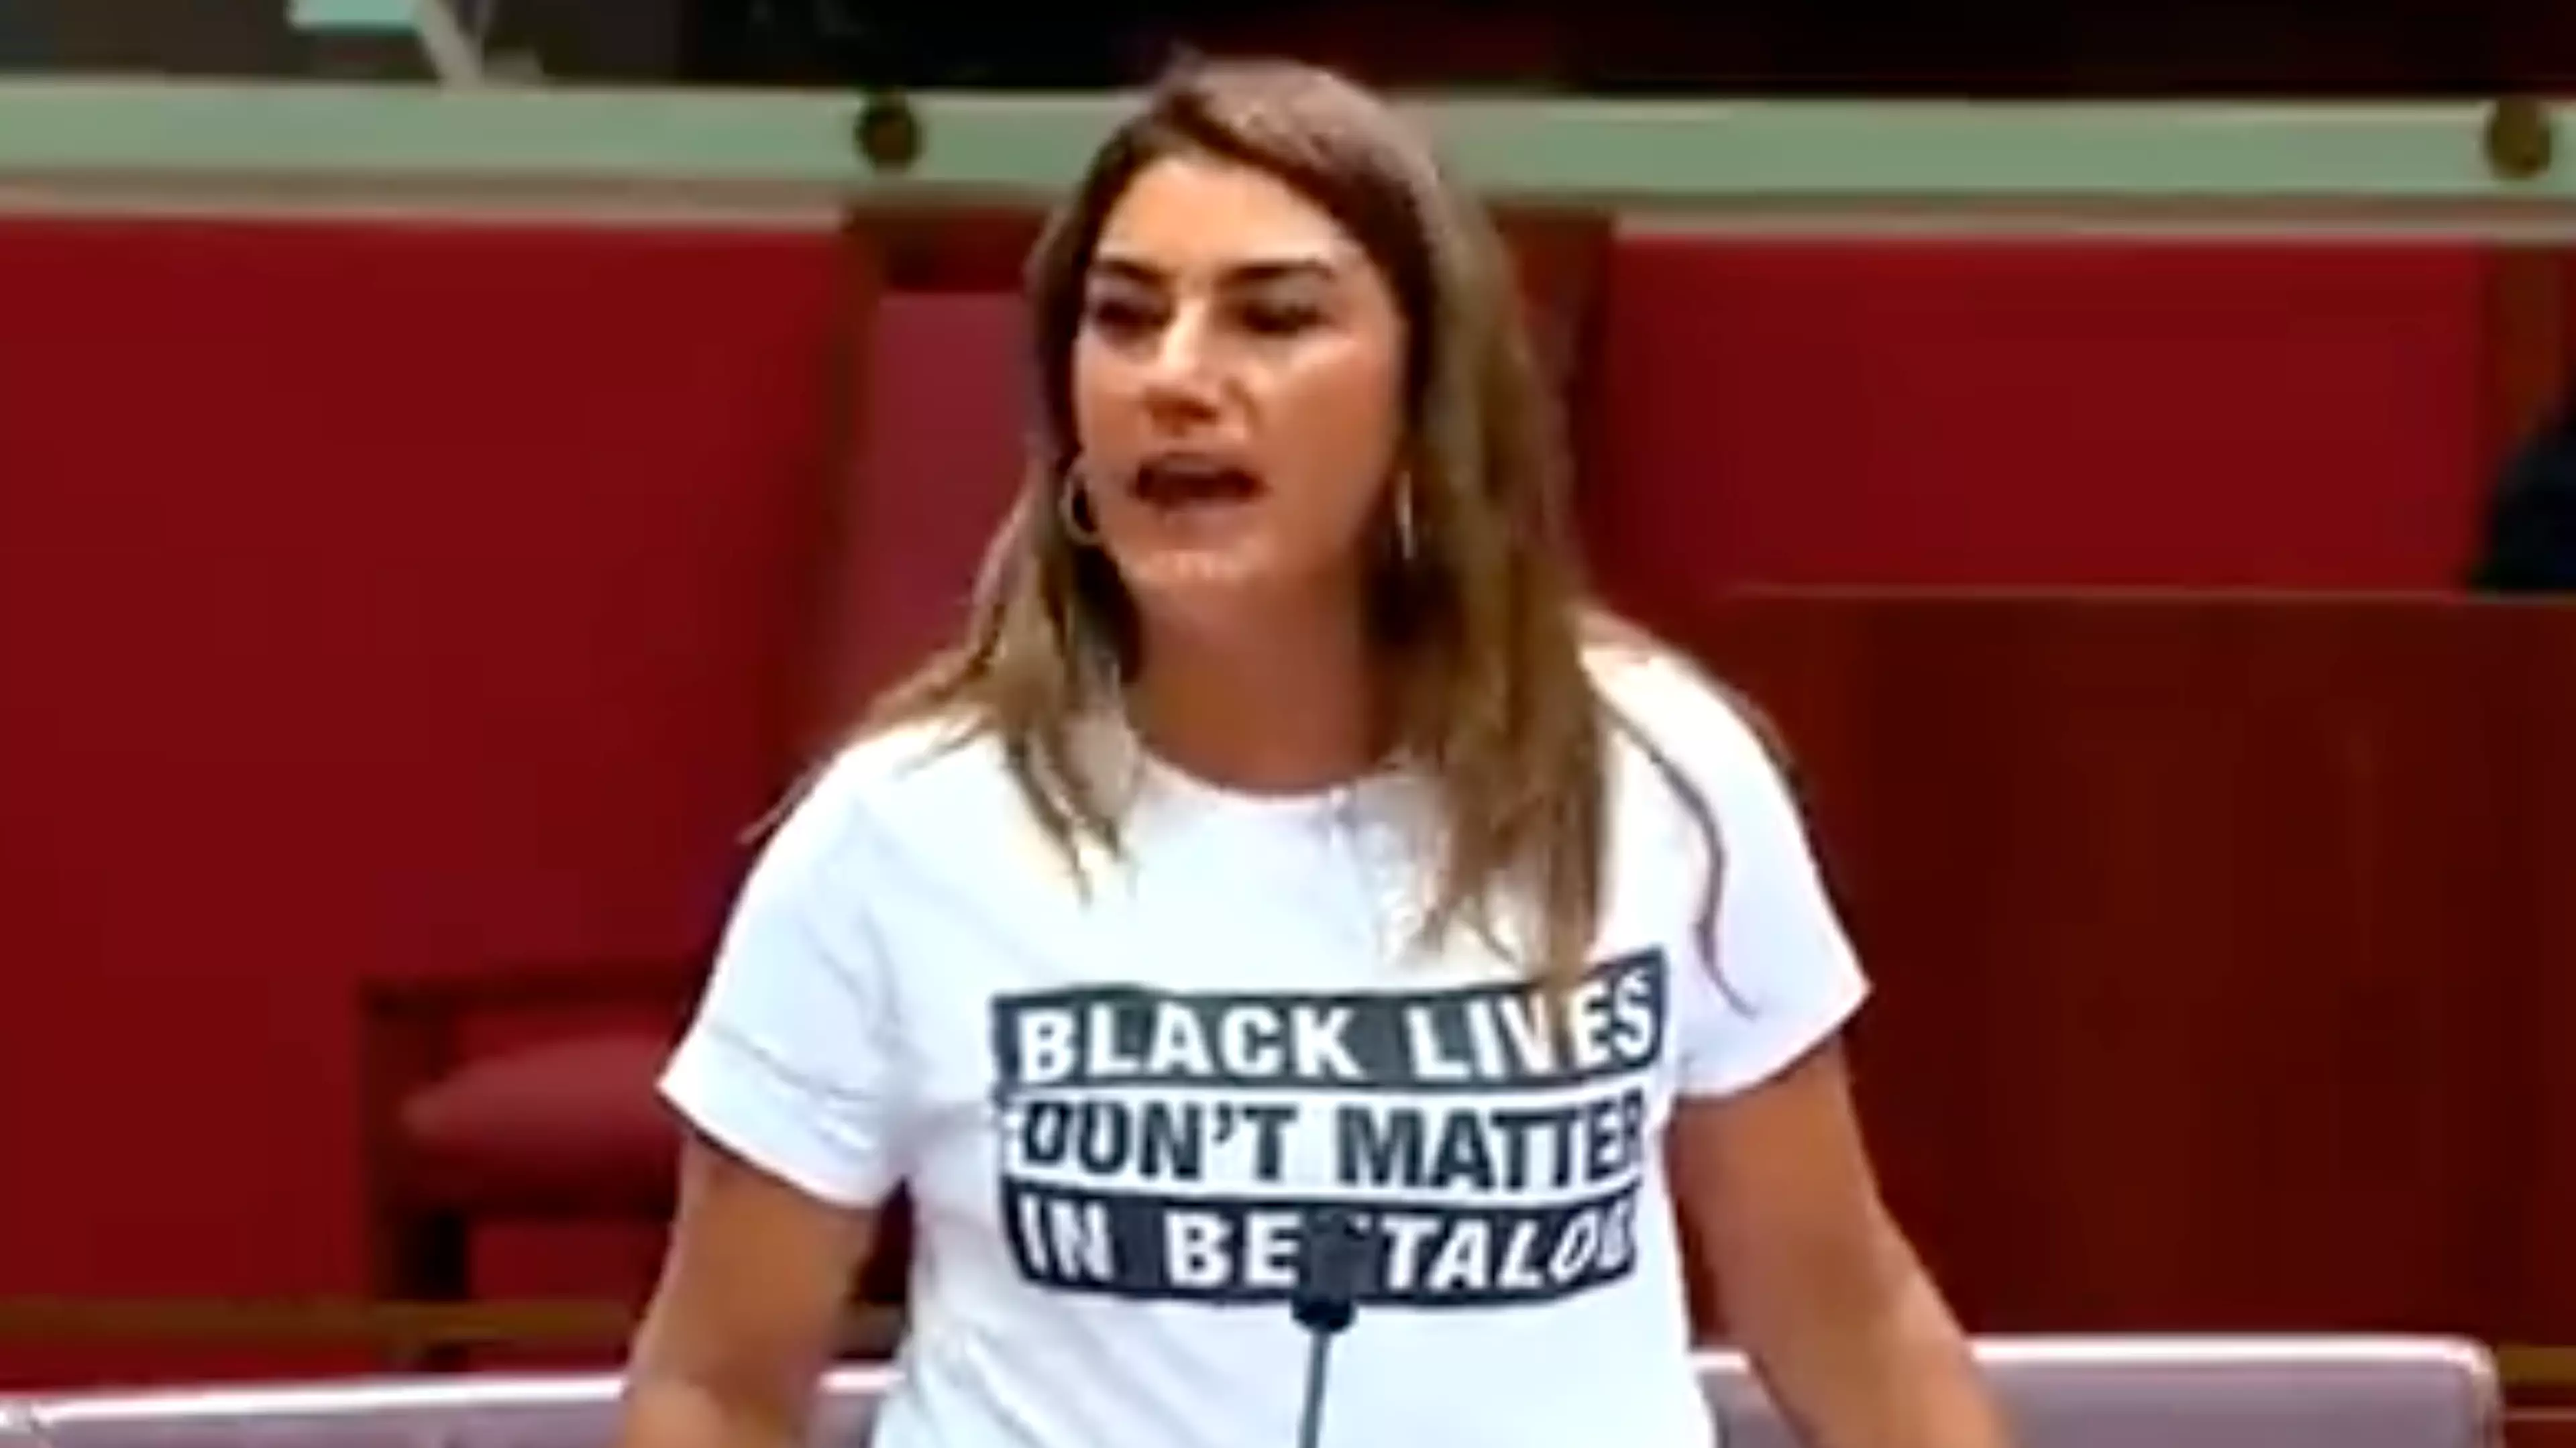 Aussie Politician Gets Booted From Senate Floor After Unveiling Black Lives Matter T-Shirt